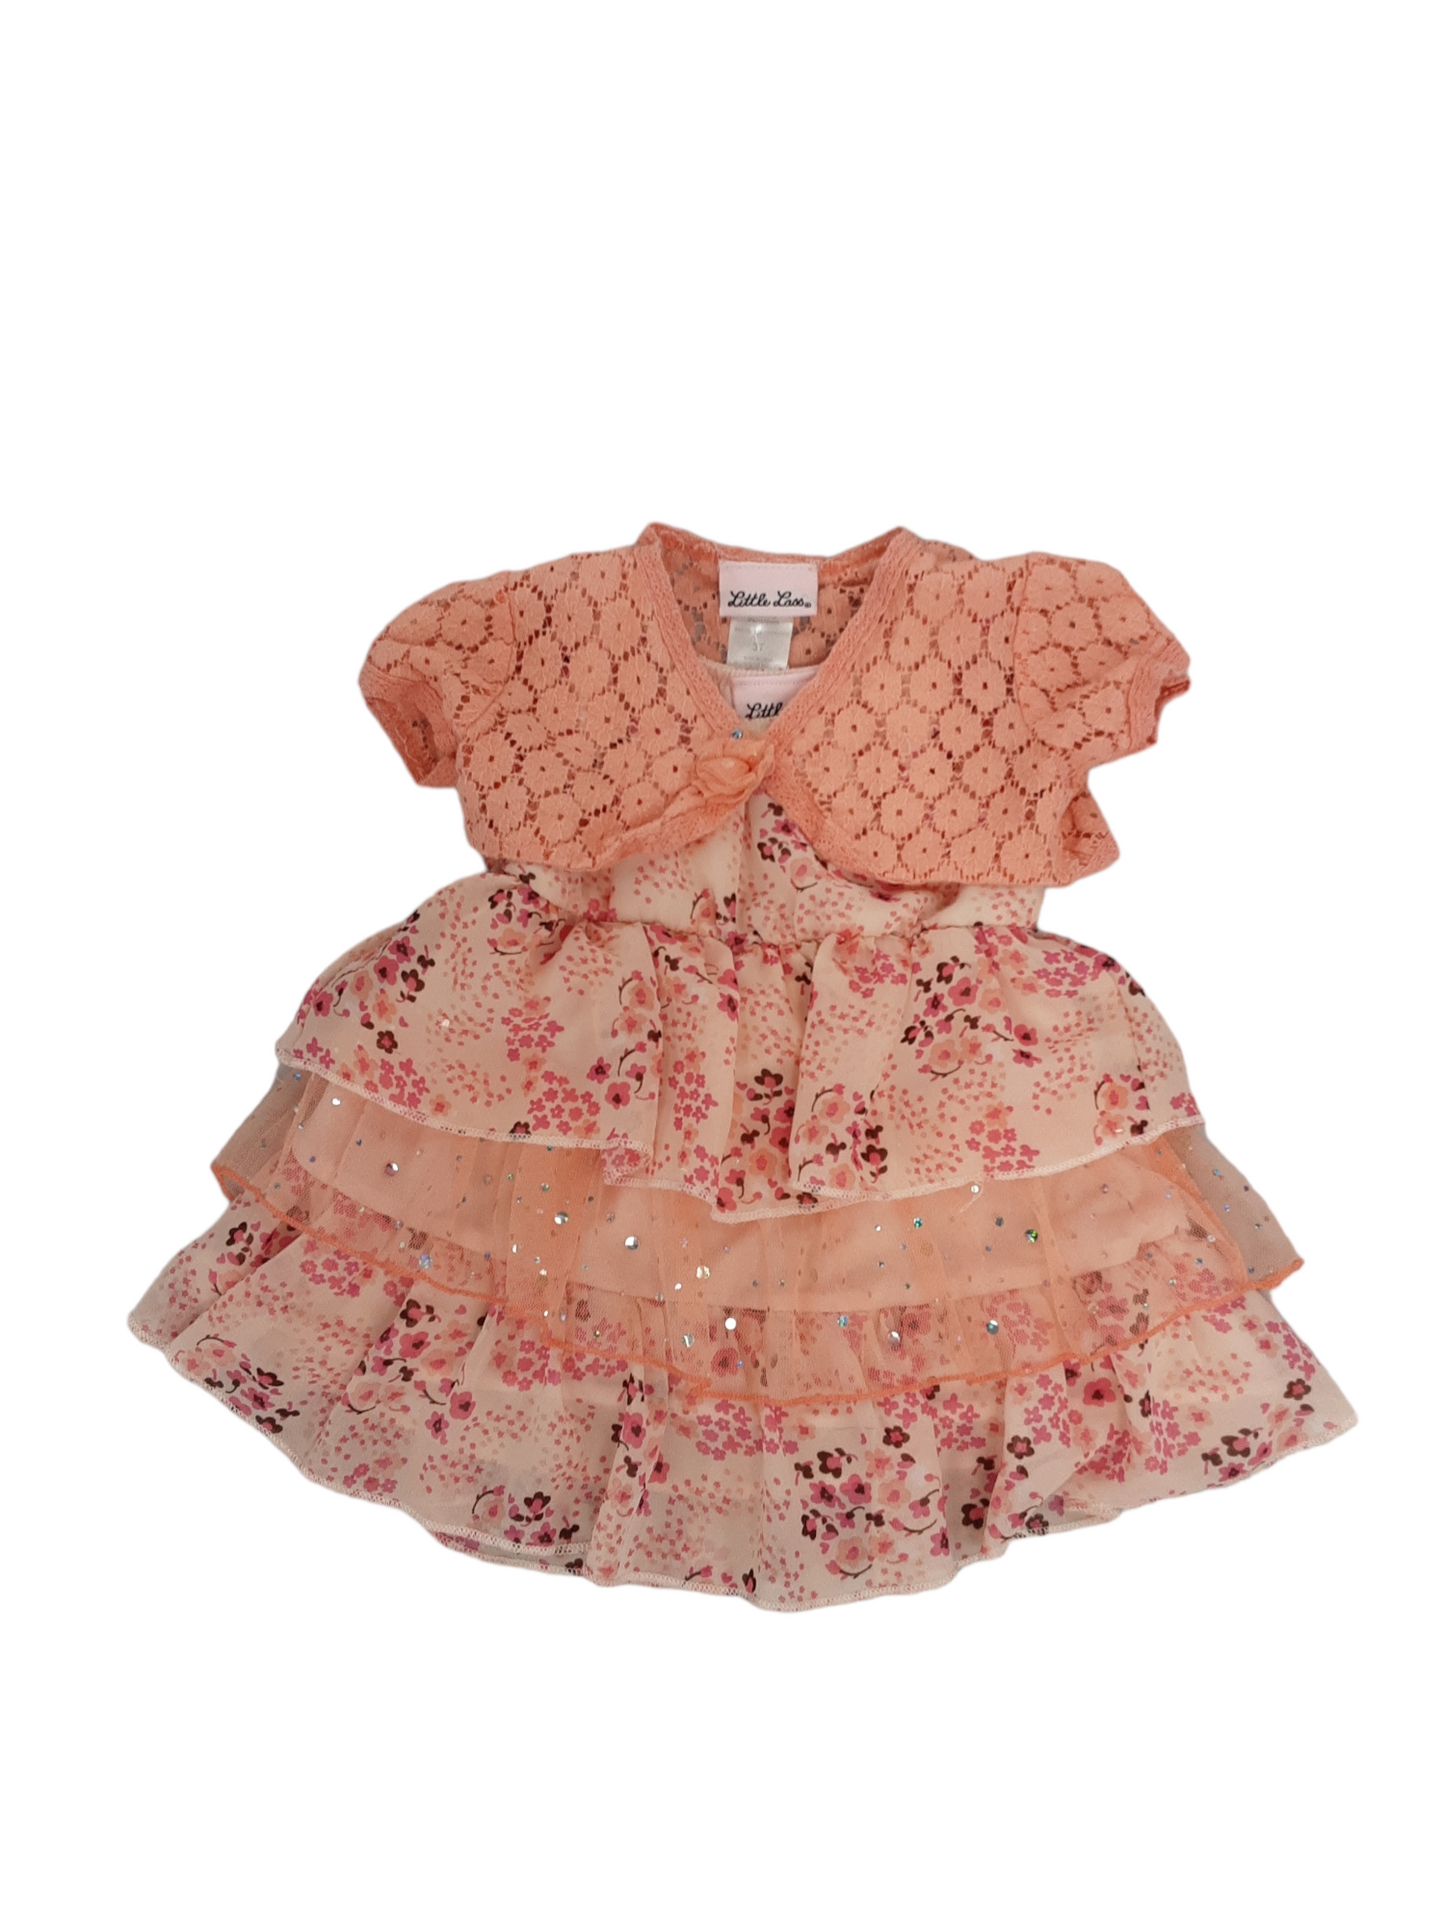 Peachy and pretty dress size 3T